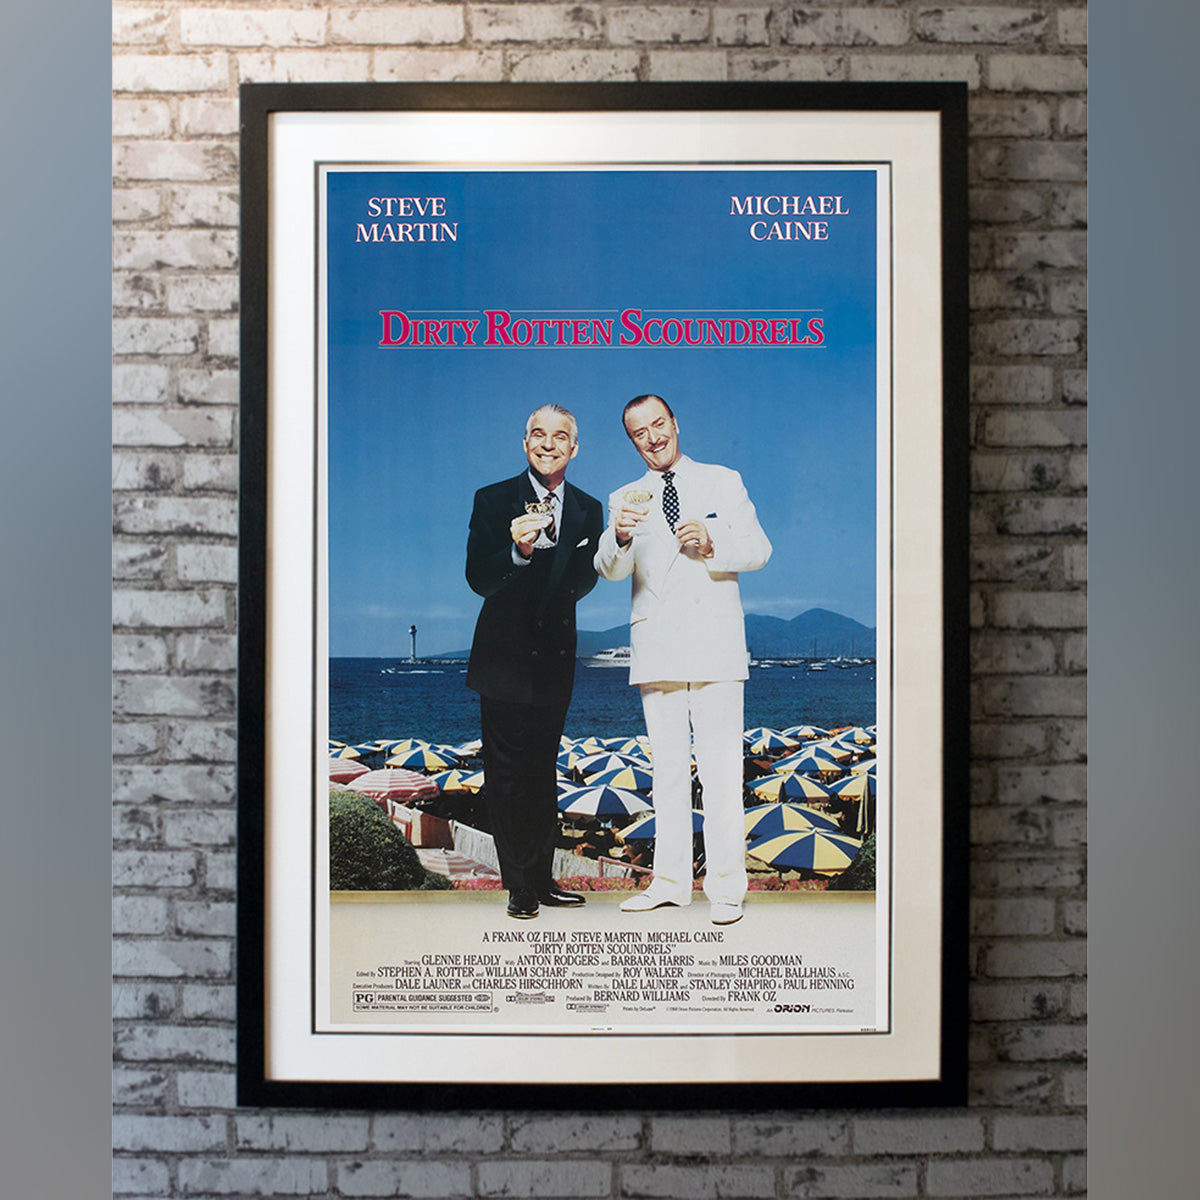 Original Movie Poster of Dirty Rotten Scoundrels (1988)